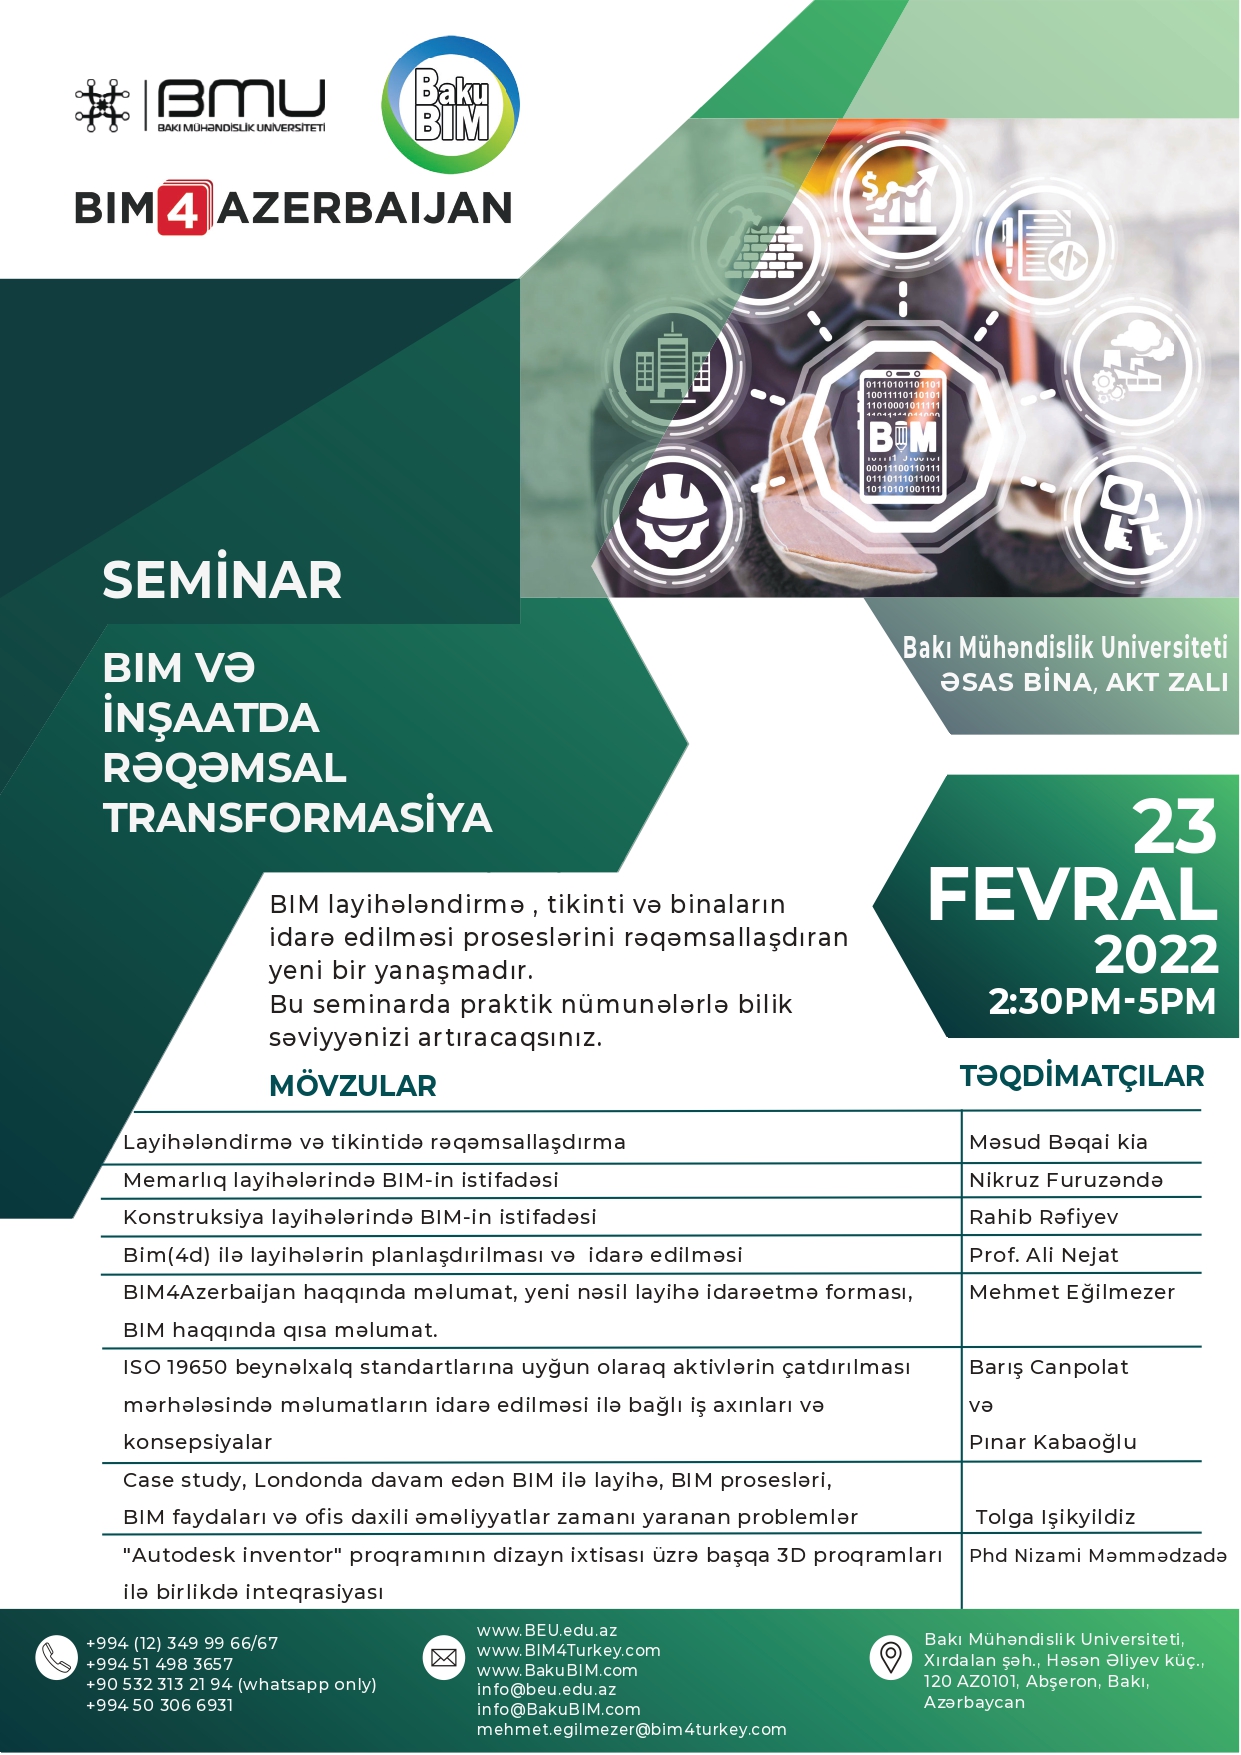 BEU to host seminar on “BIM and Digital Transformation in the Construction Industry”